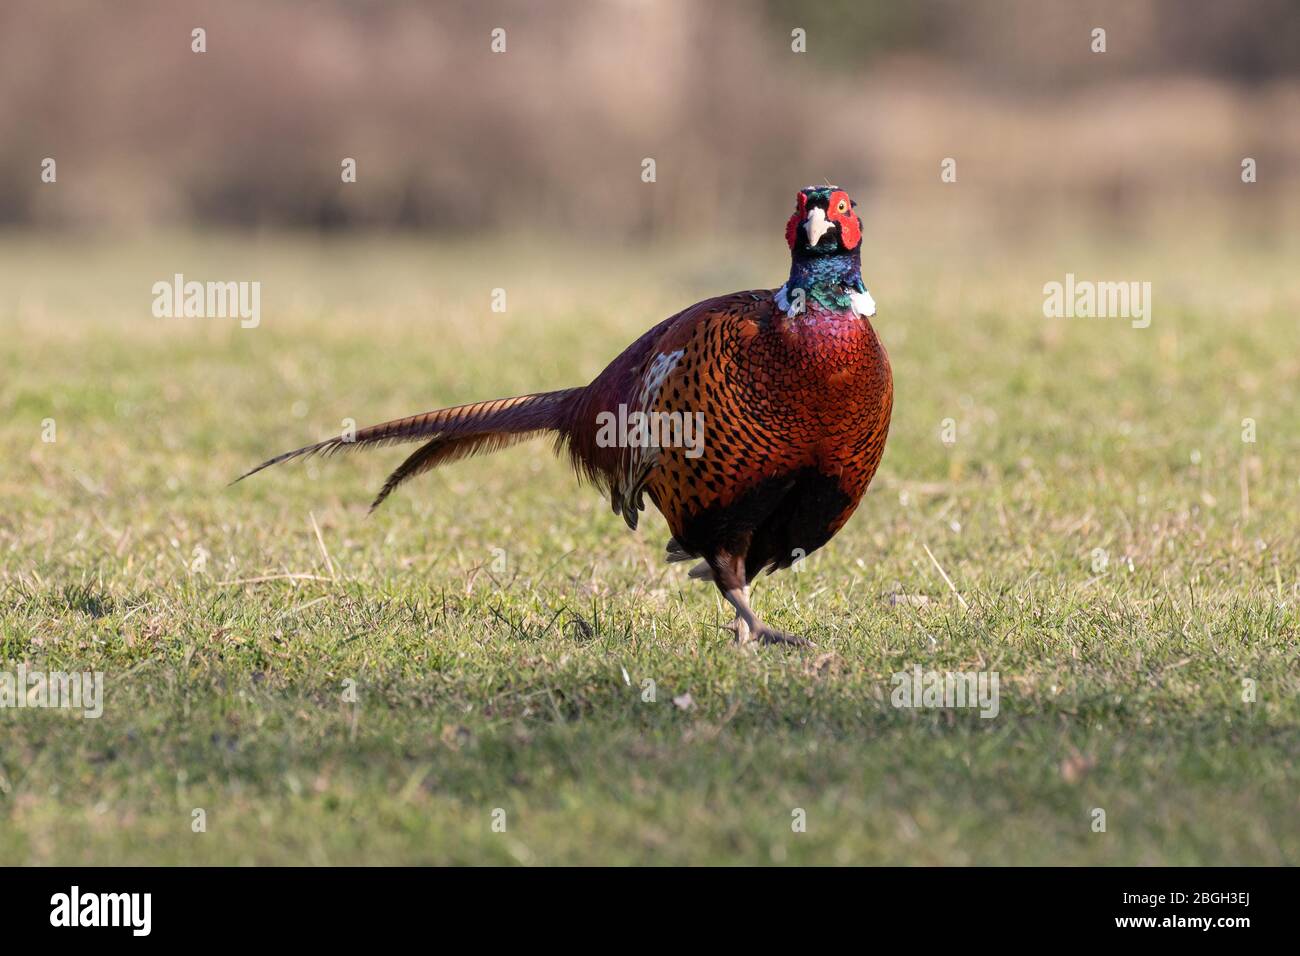 A cautious pheasant in the morning sun Stock Photo